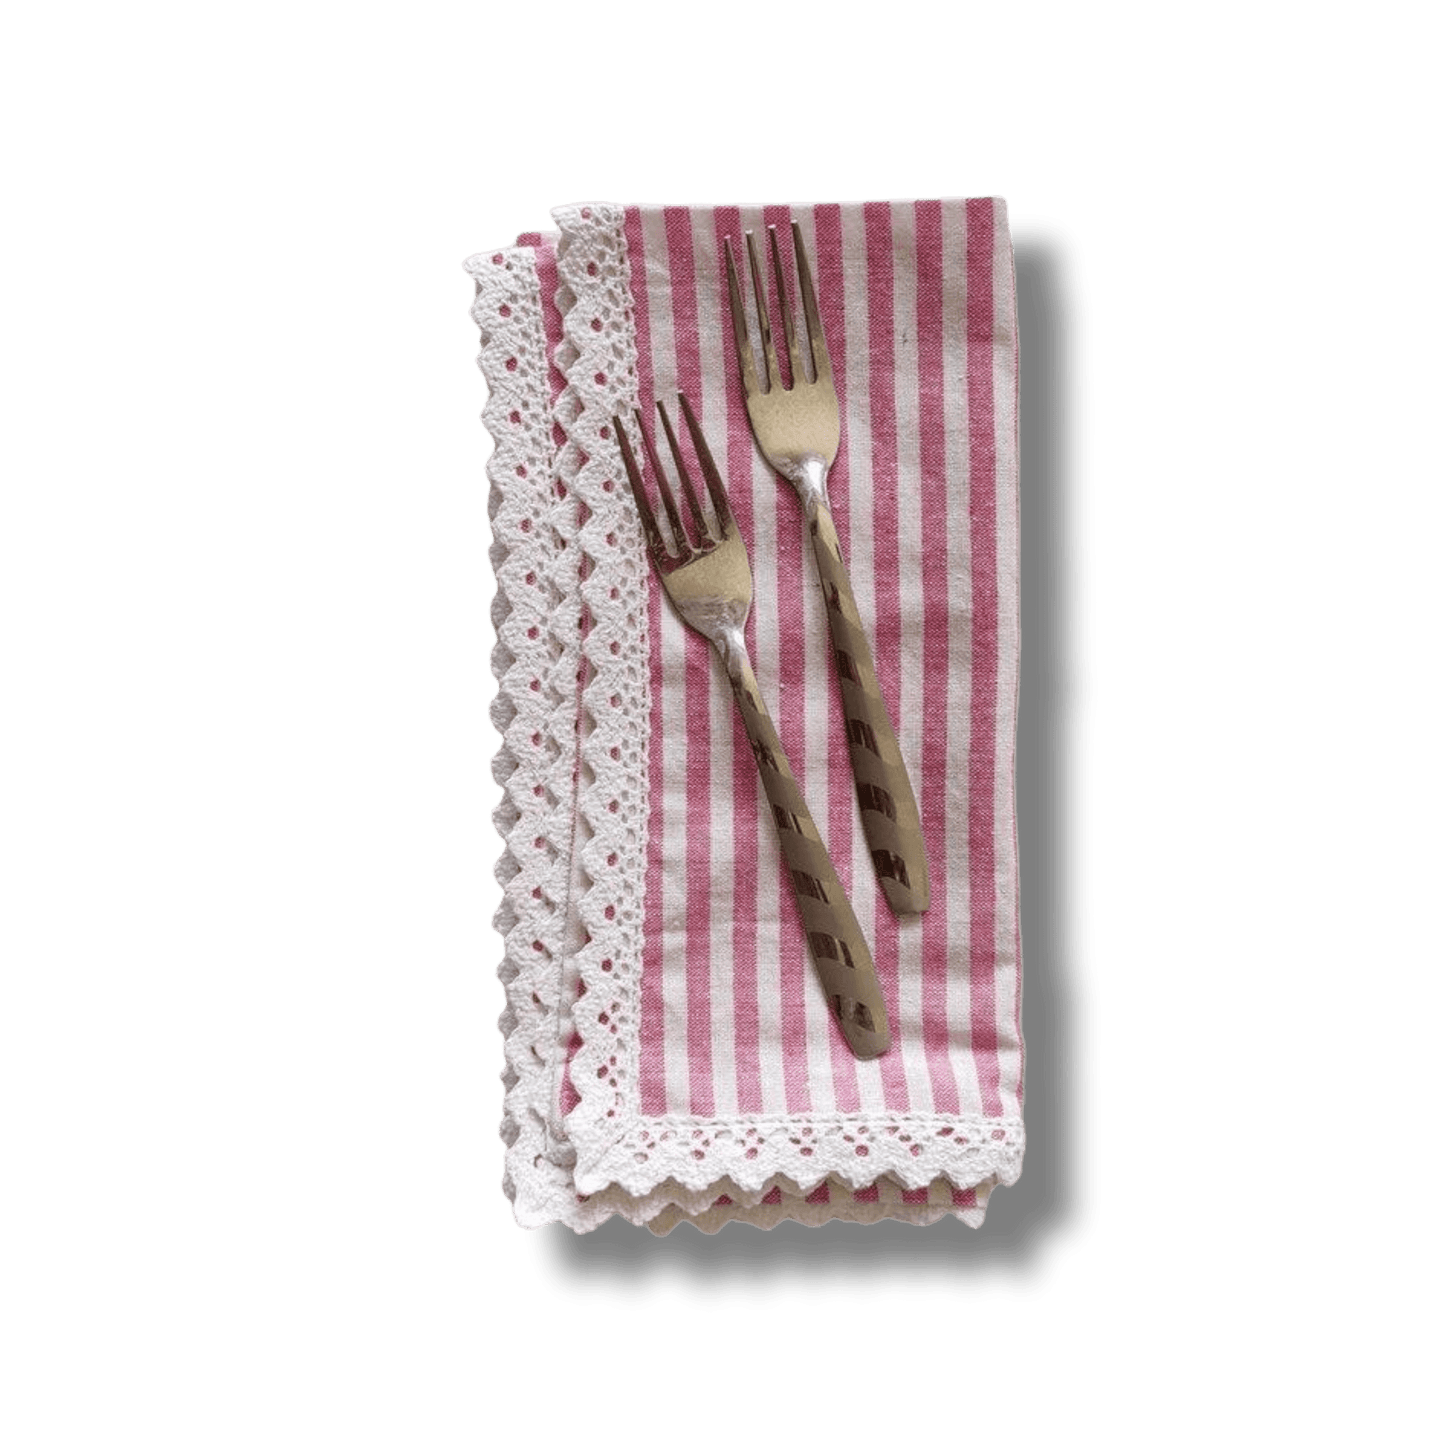 Striped Linen Napkins with White Lace - MAIA HOMES